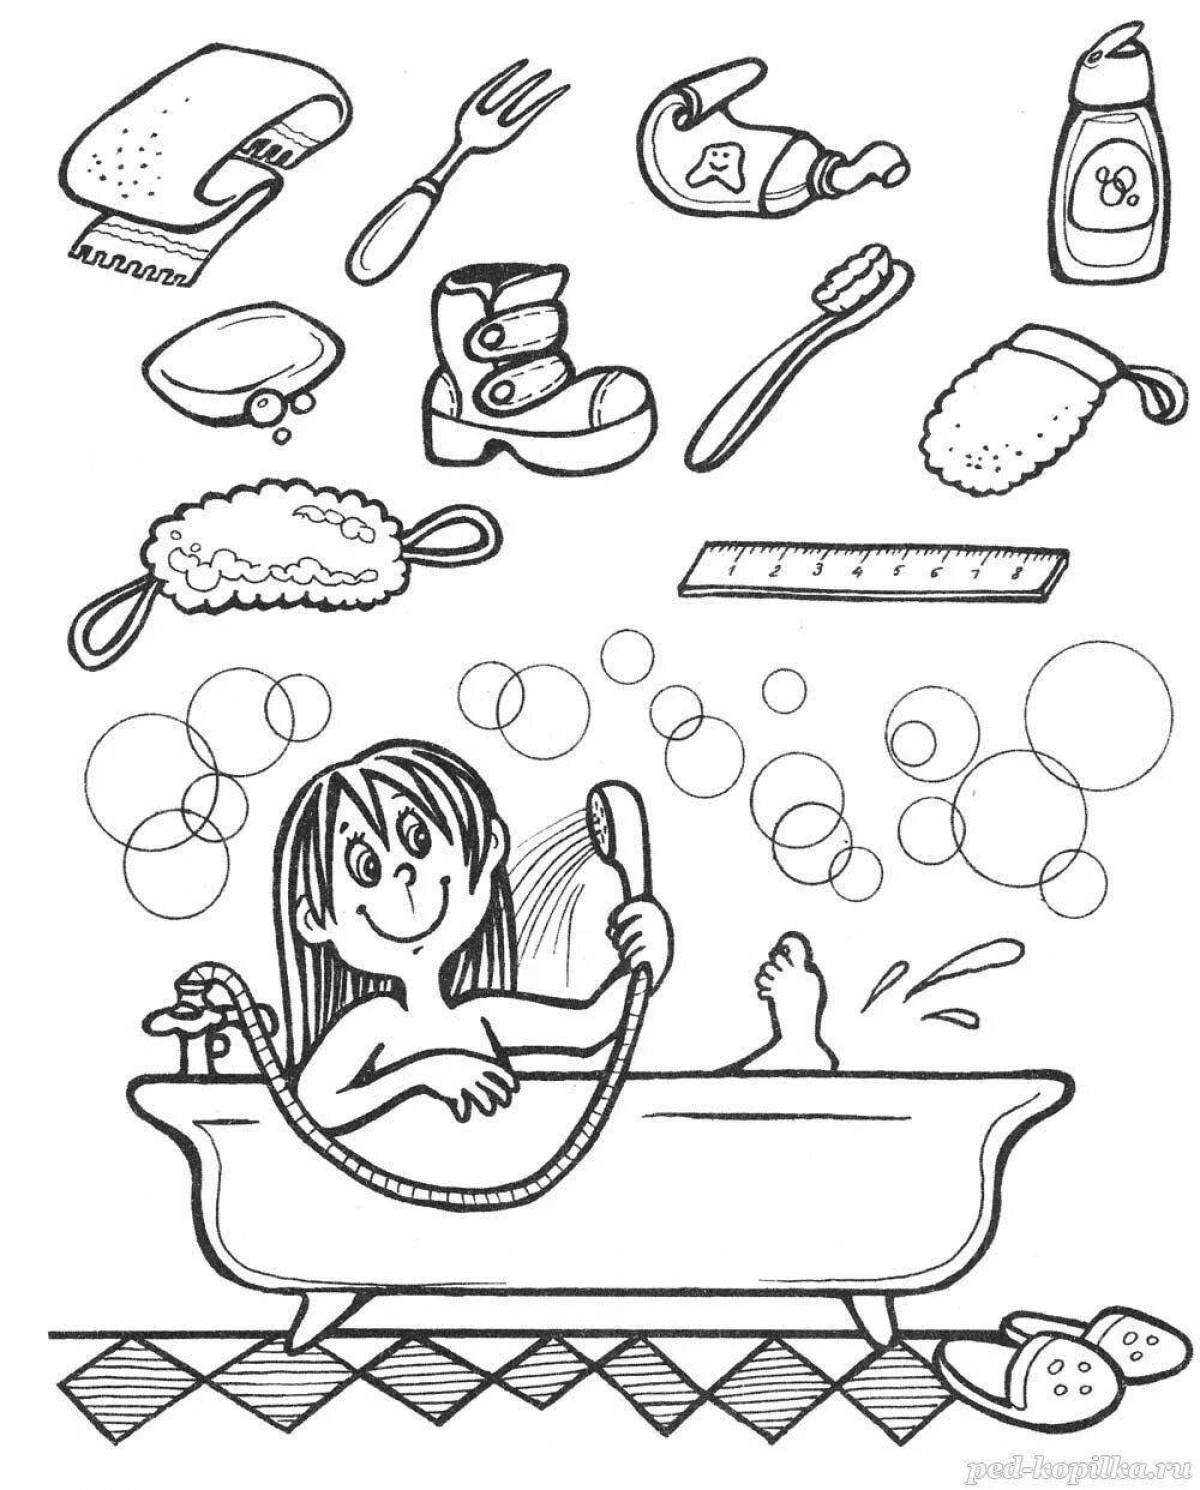 Coloring page wonderful personal care items